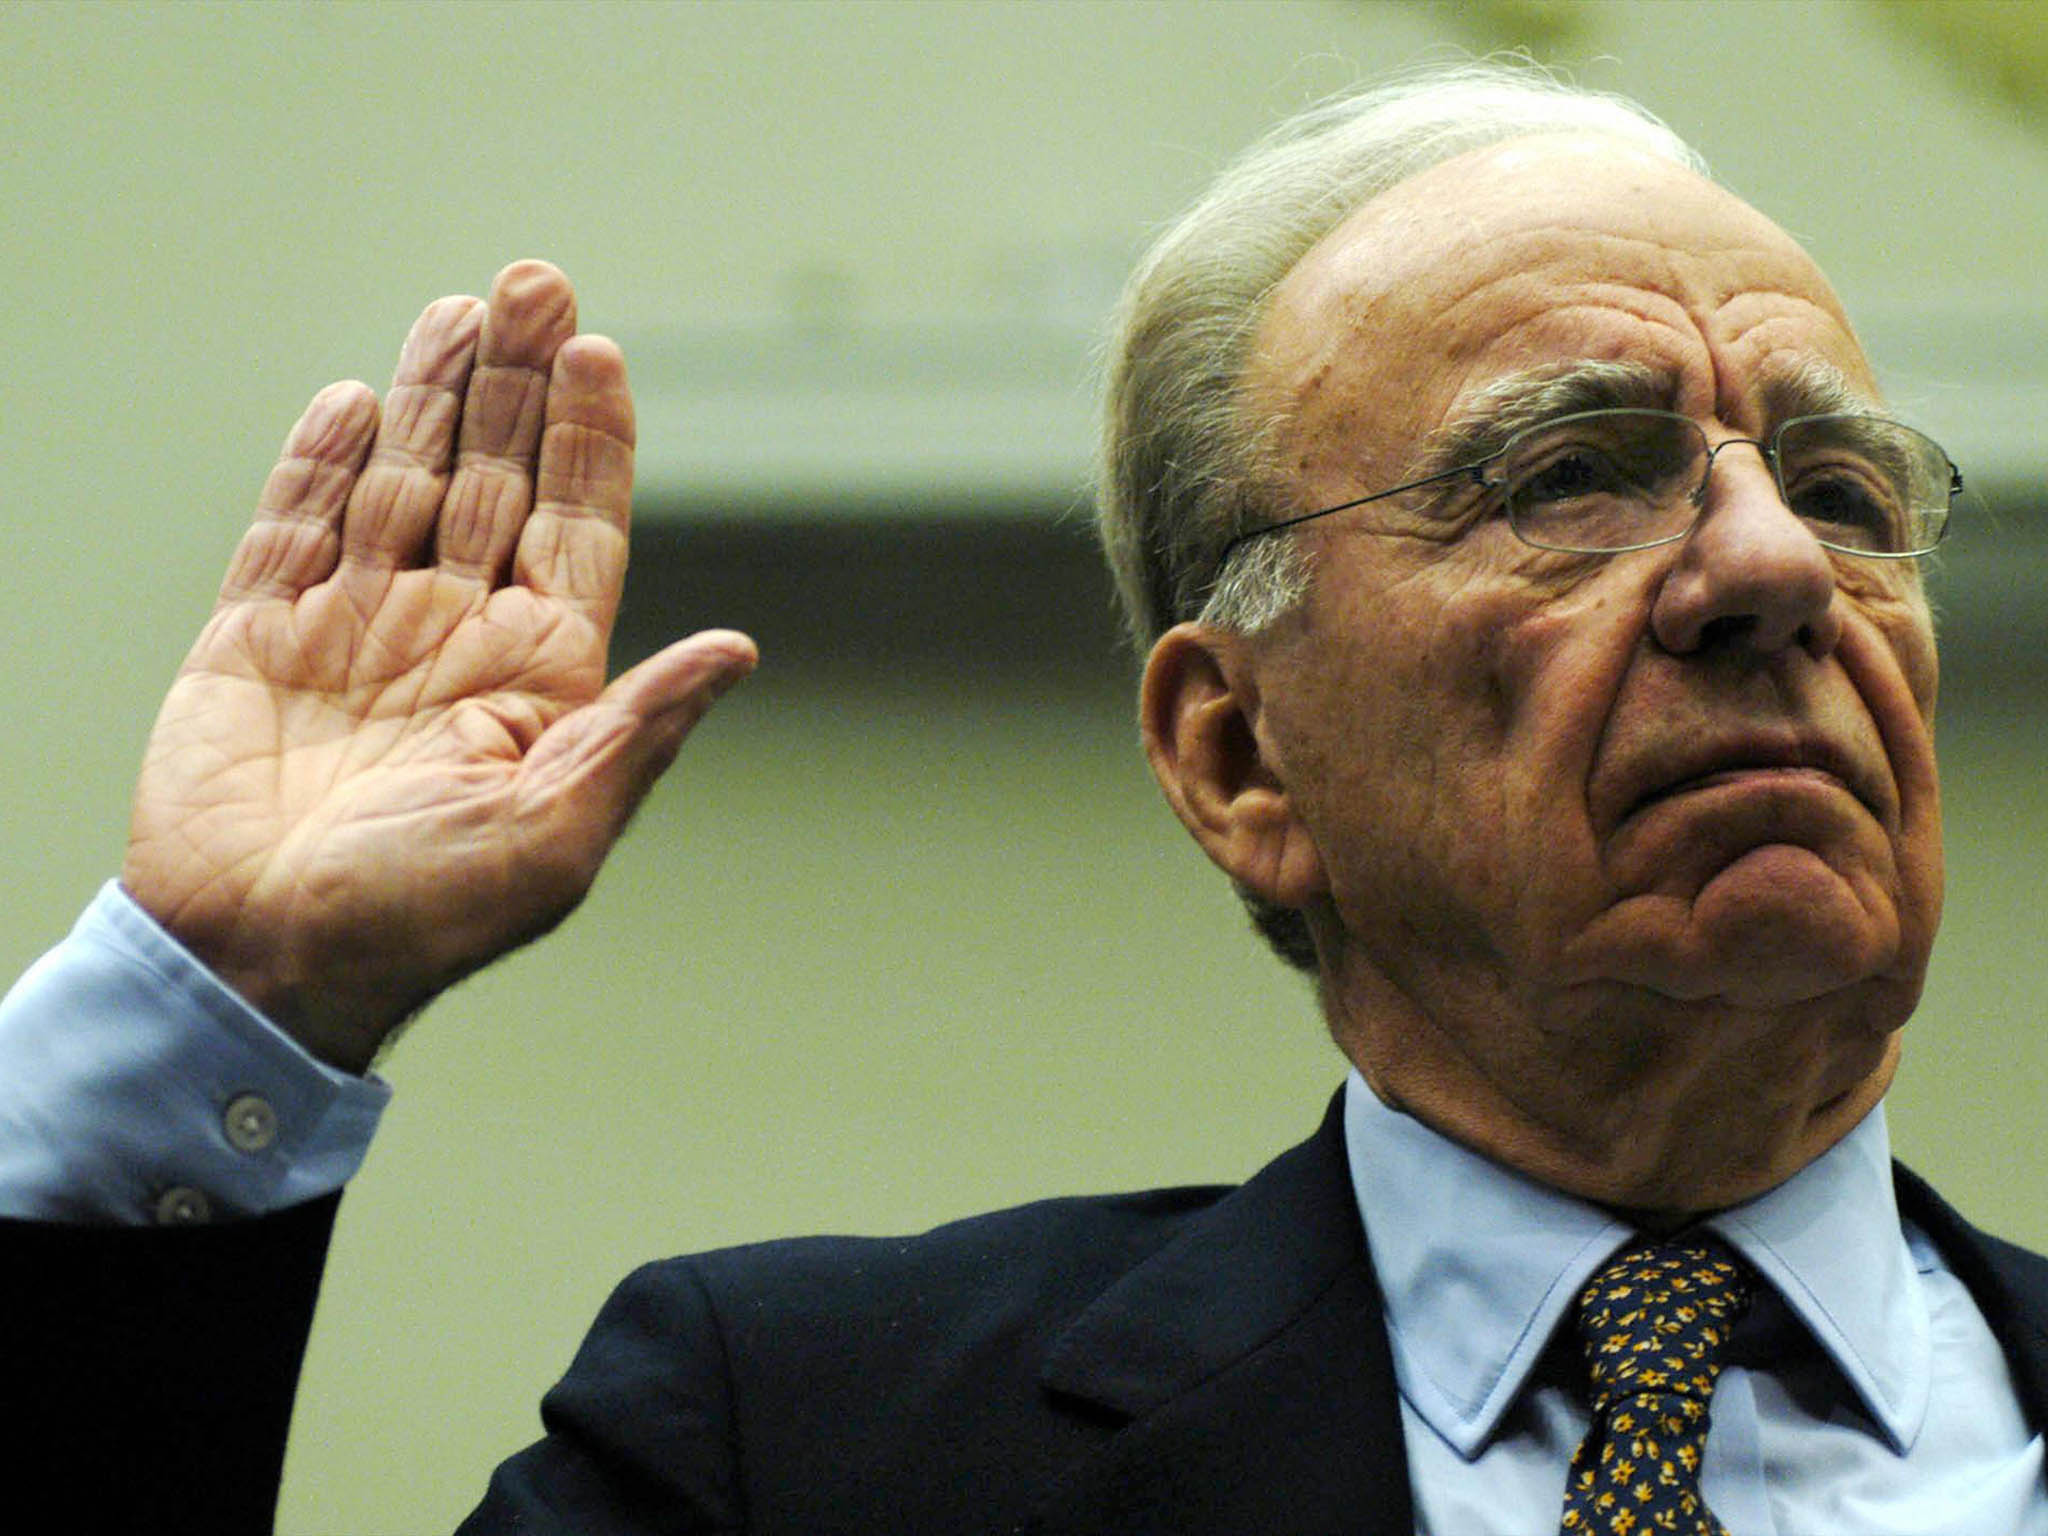 Rupert Murdoch, is sworn in before testimony to the House Committee on the Judiciary on Capitol Hill in Washington